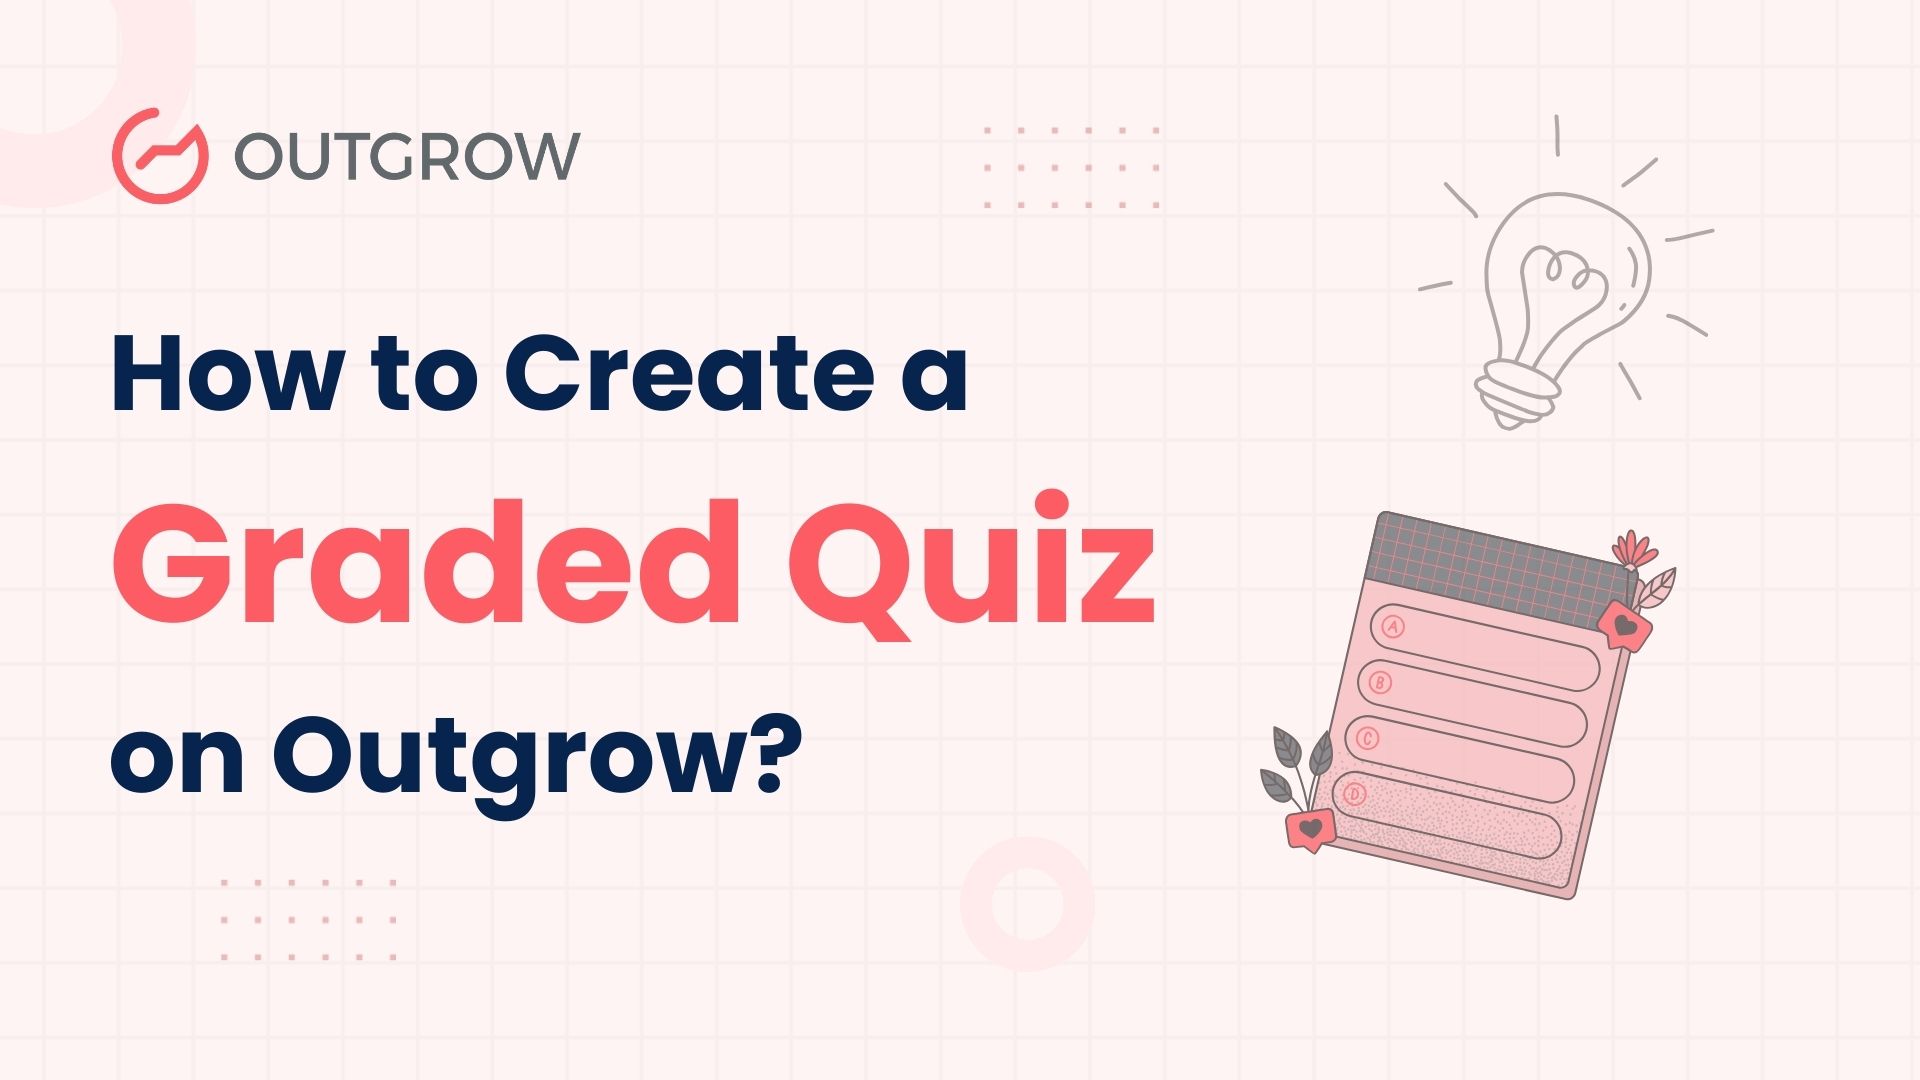 How to create a graded quiz on outgrow?